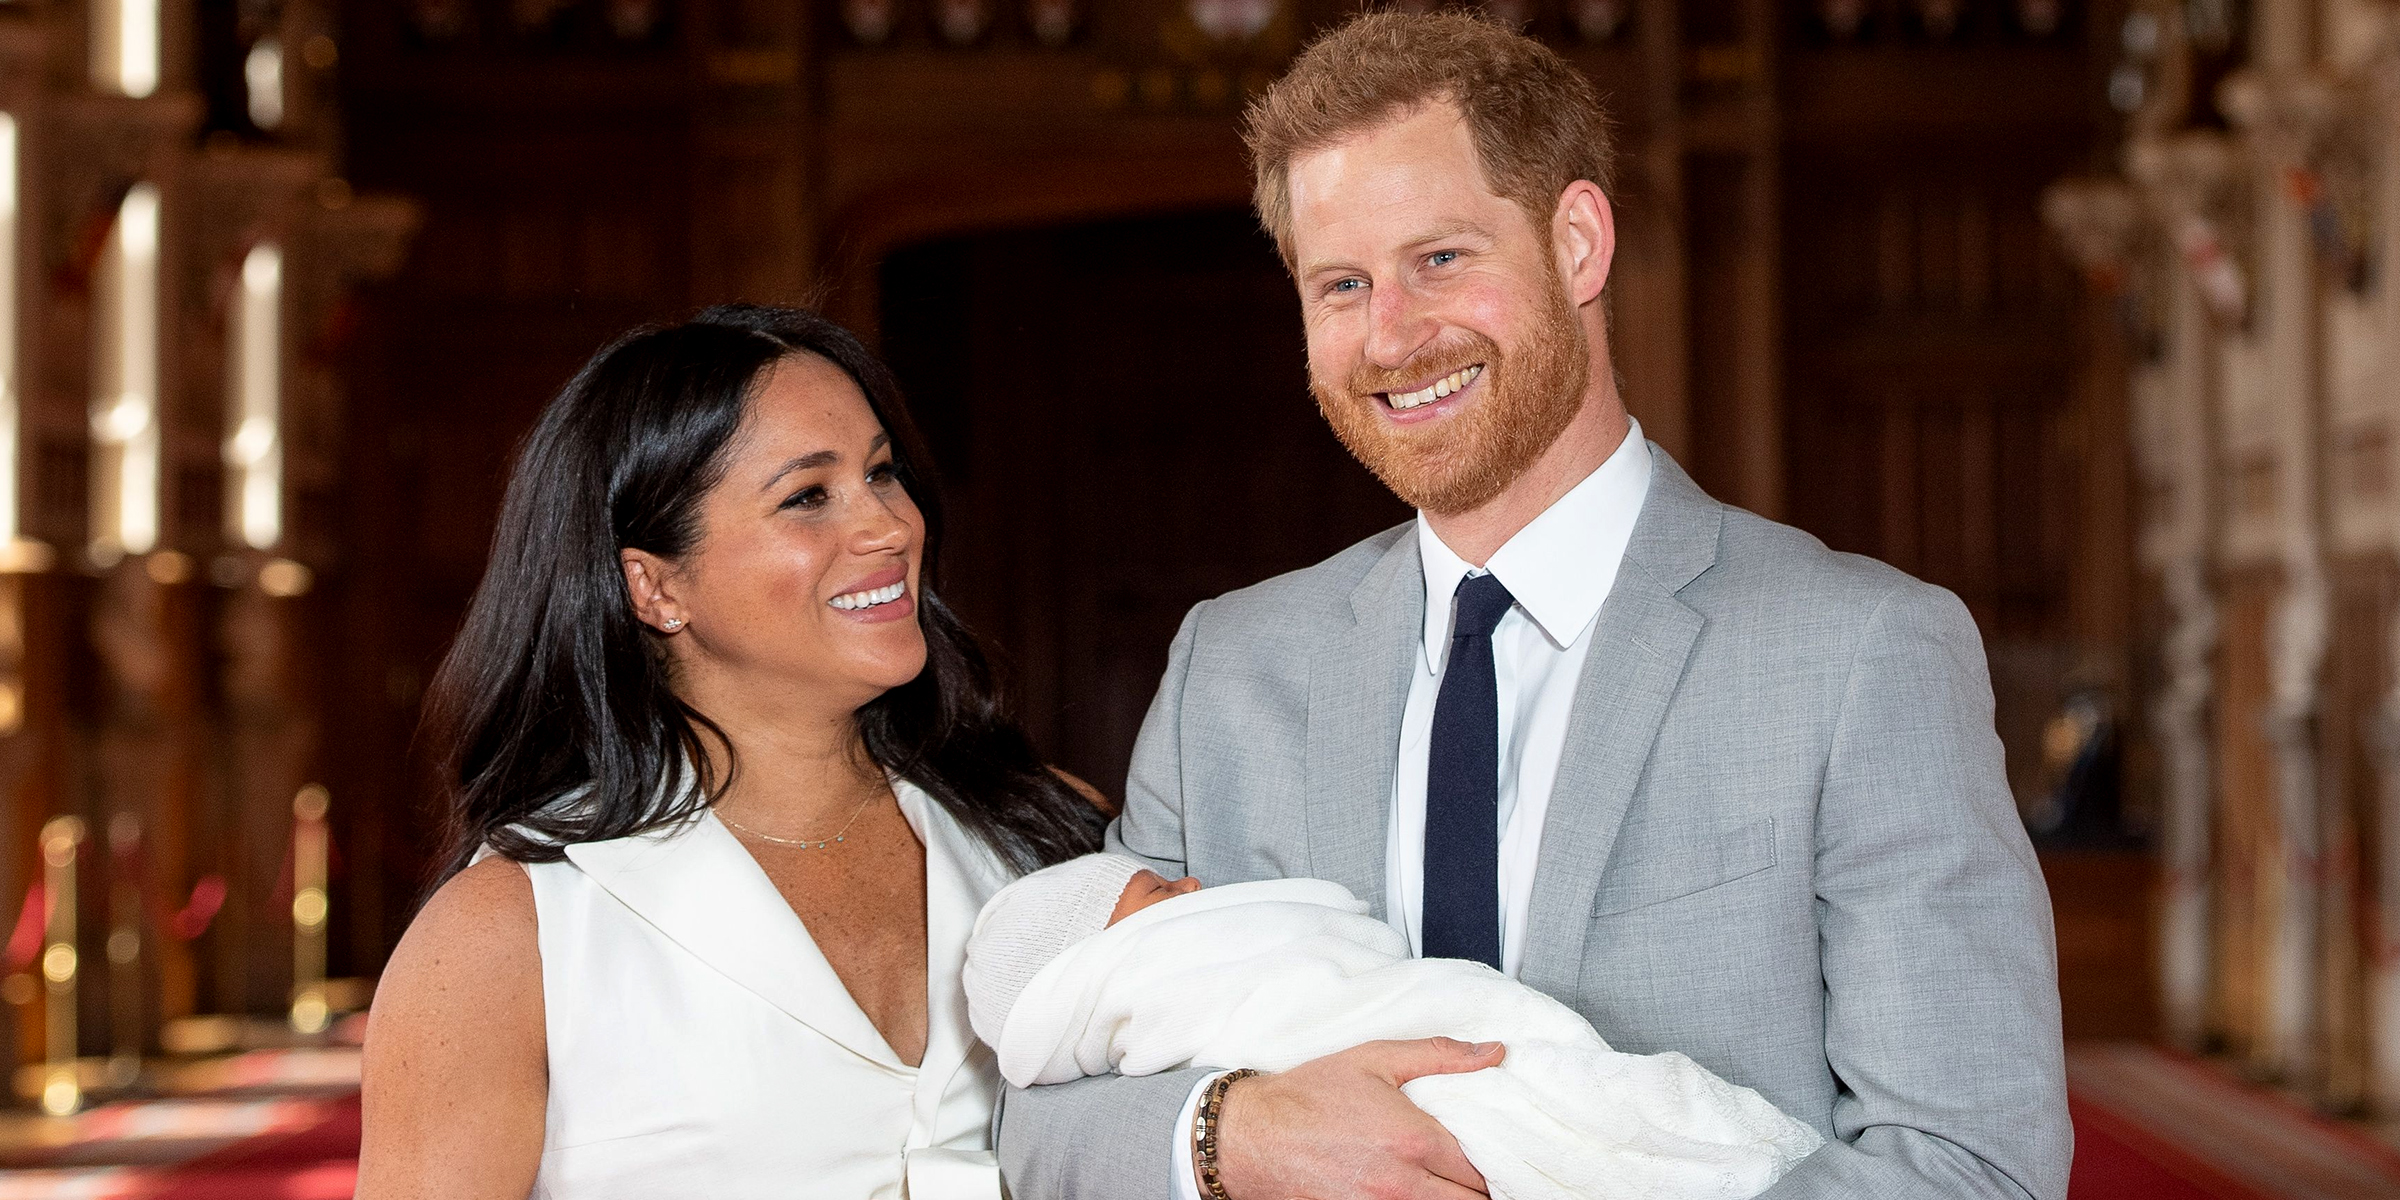 Prince Harry and Meghan Markle with their son, Archie | Source: Getty Images